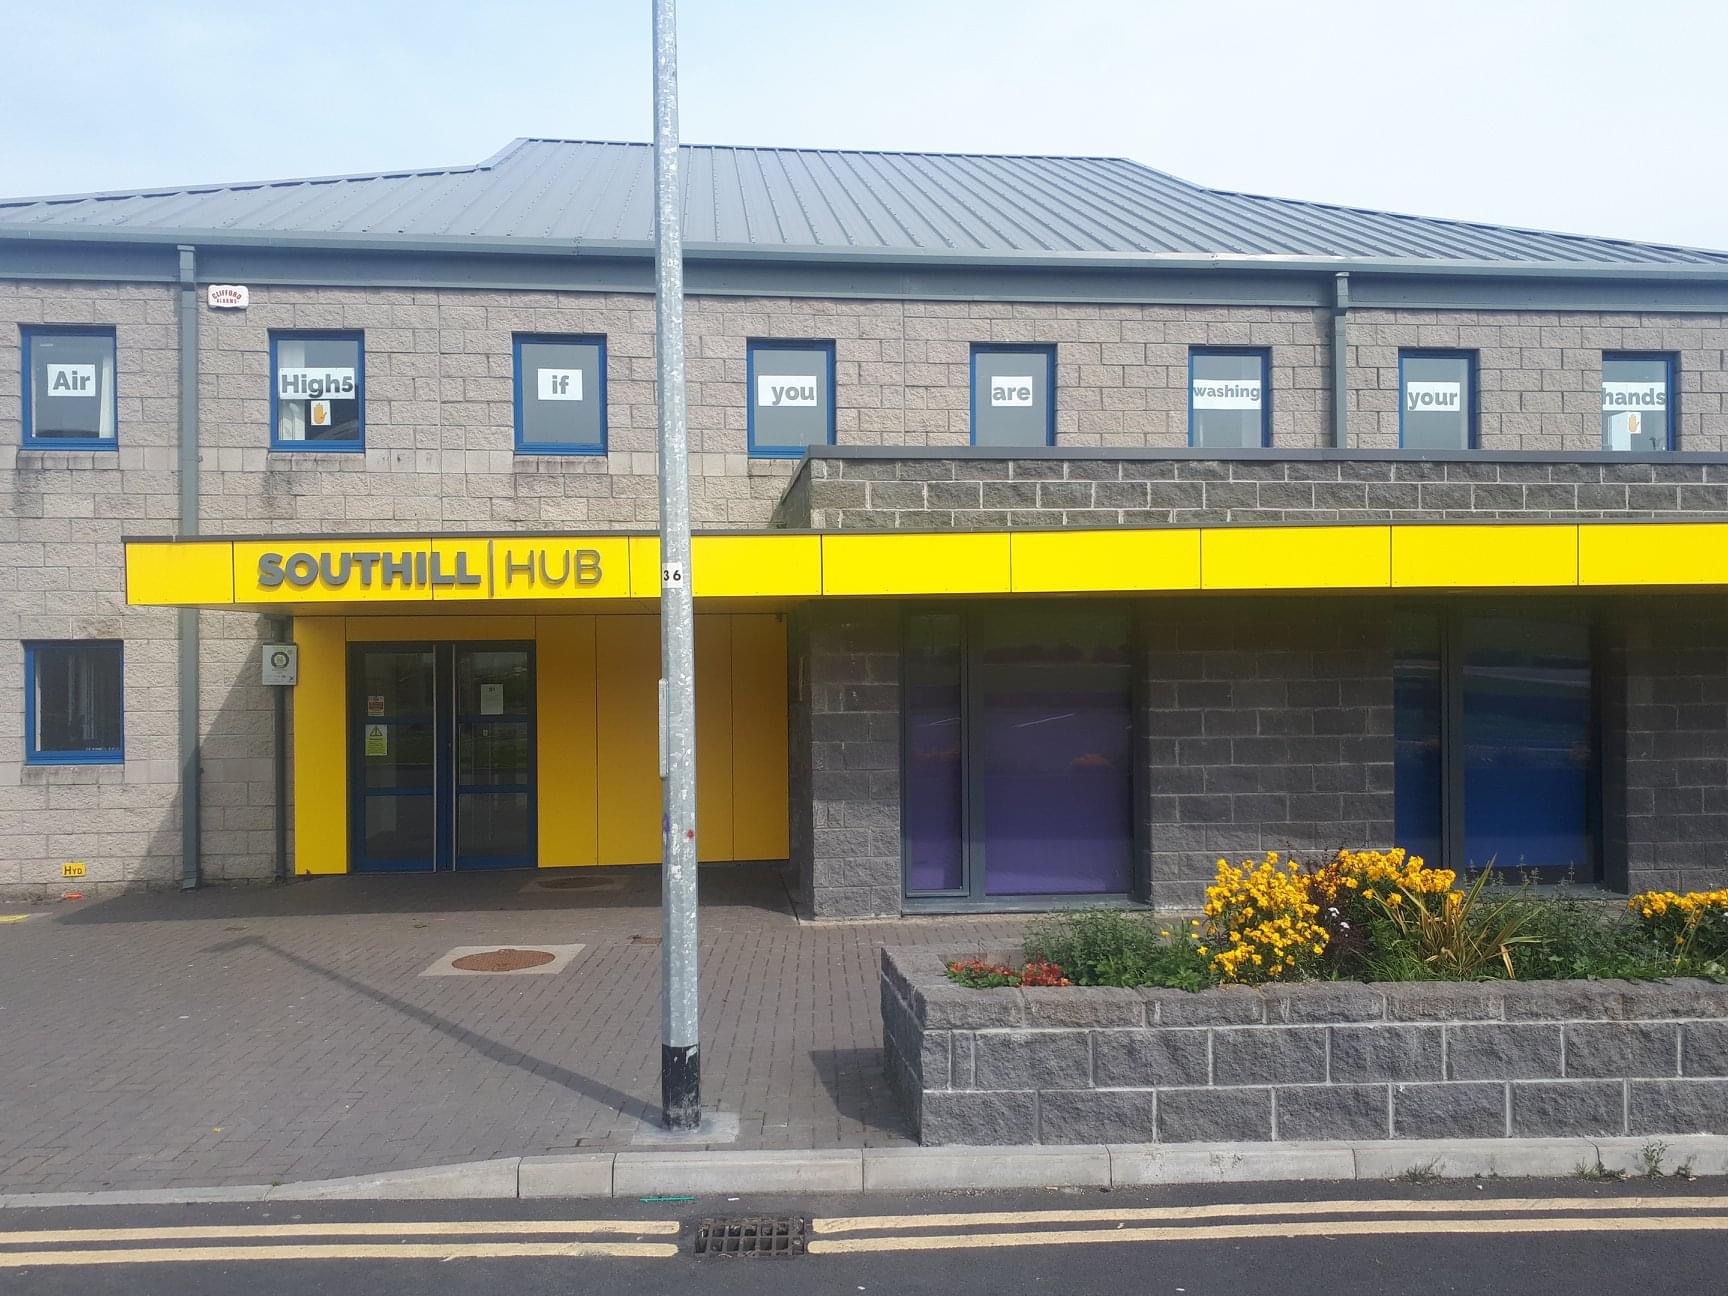 Southill Hub pictured above